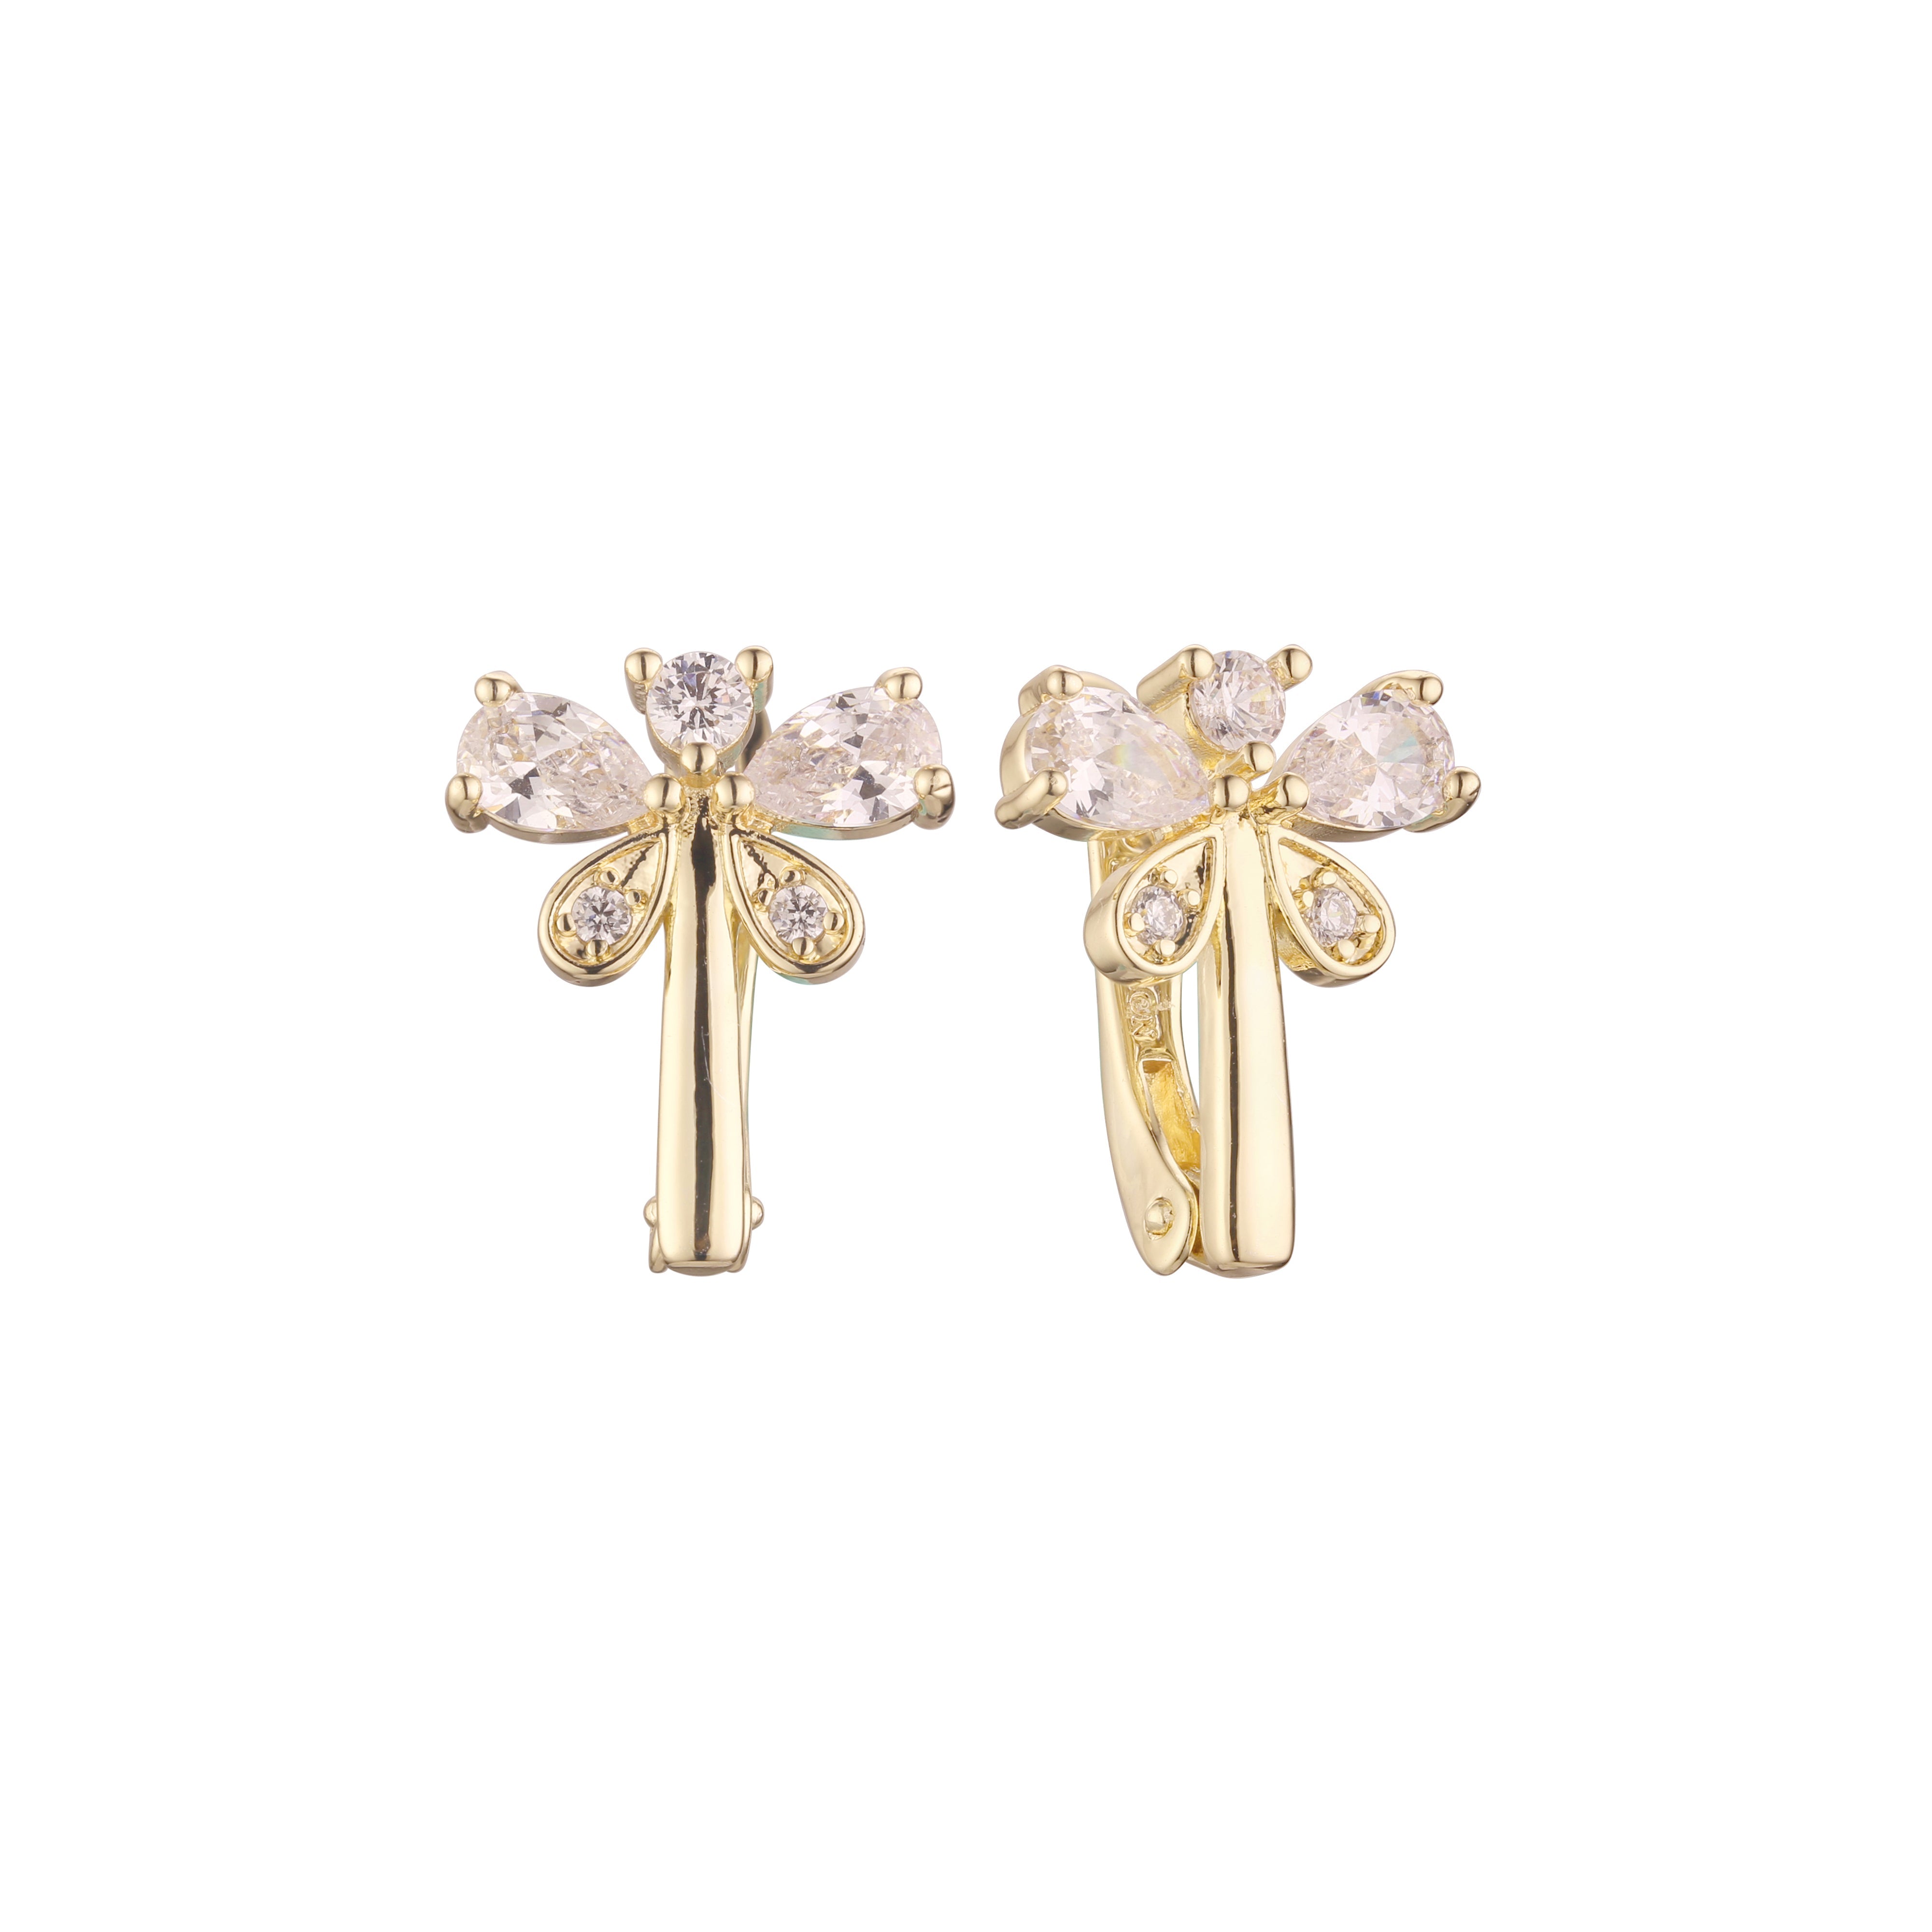 Dragonfly cluster earrings in 14K Gold, Rose Gold plating colors